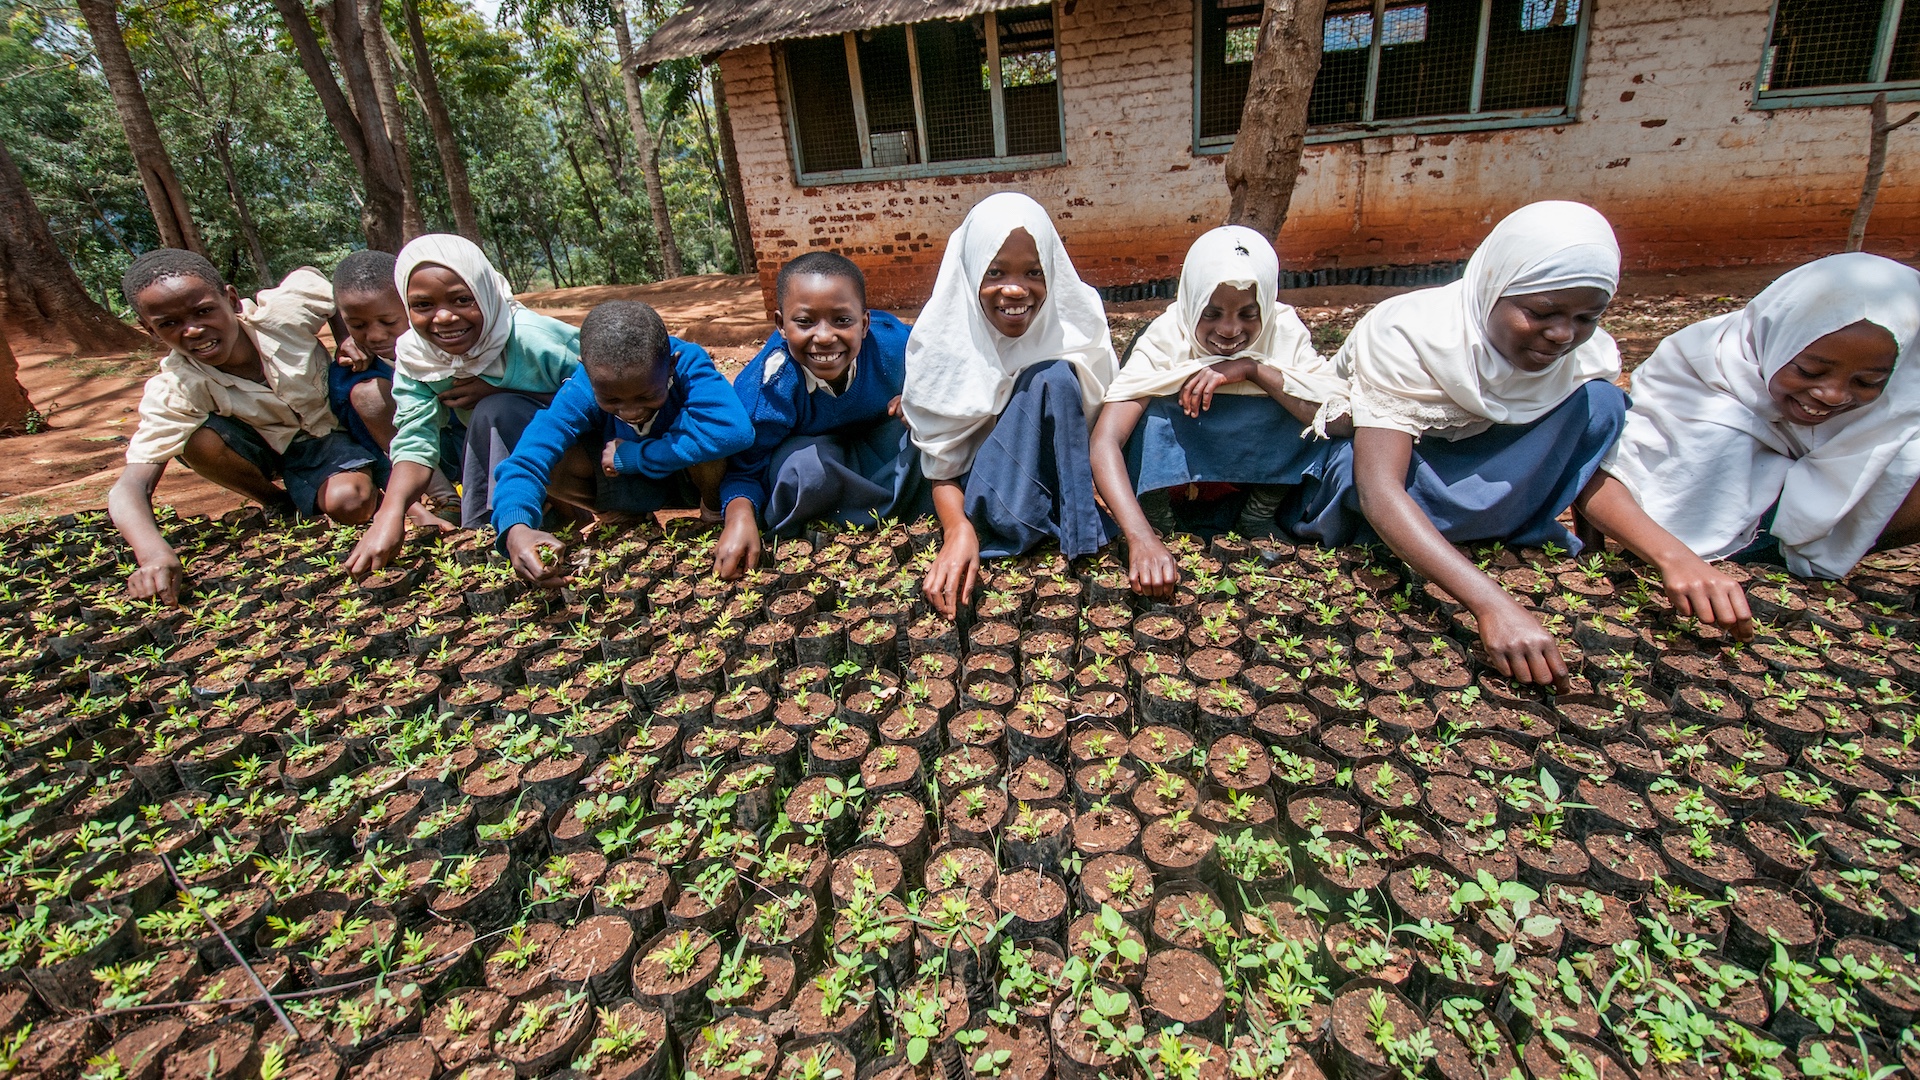 Students in Lushoto, Tanzania care for seedlings at school.